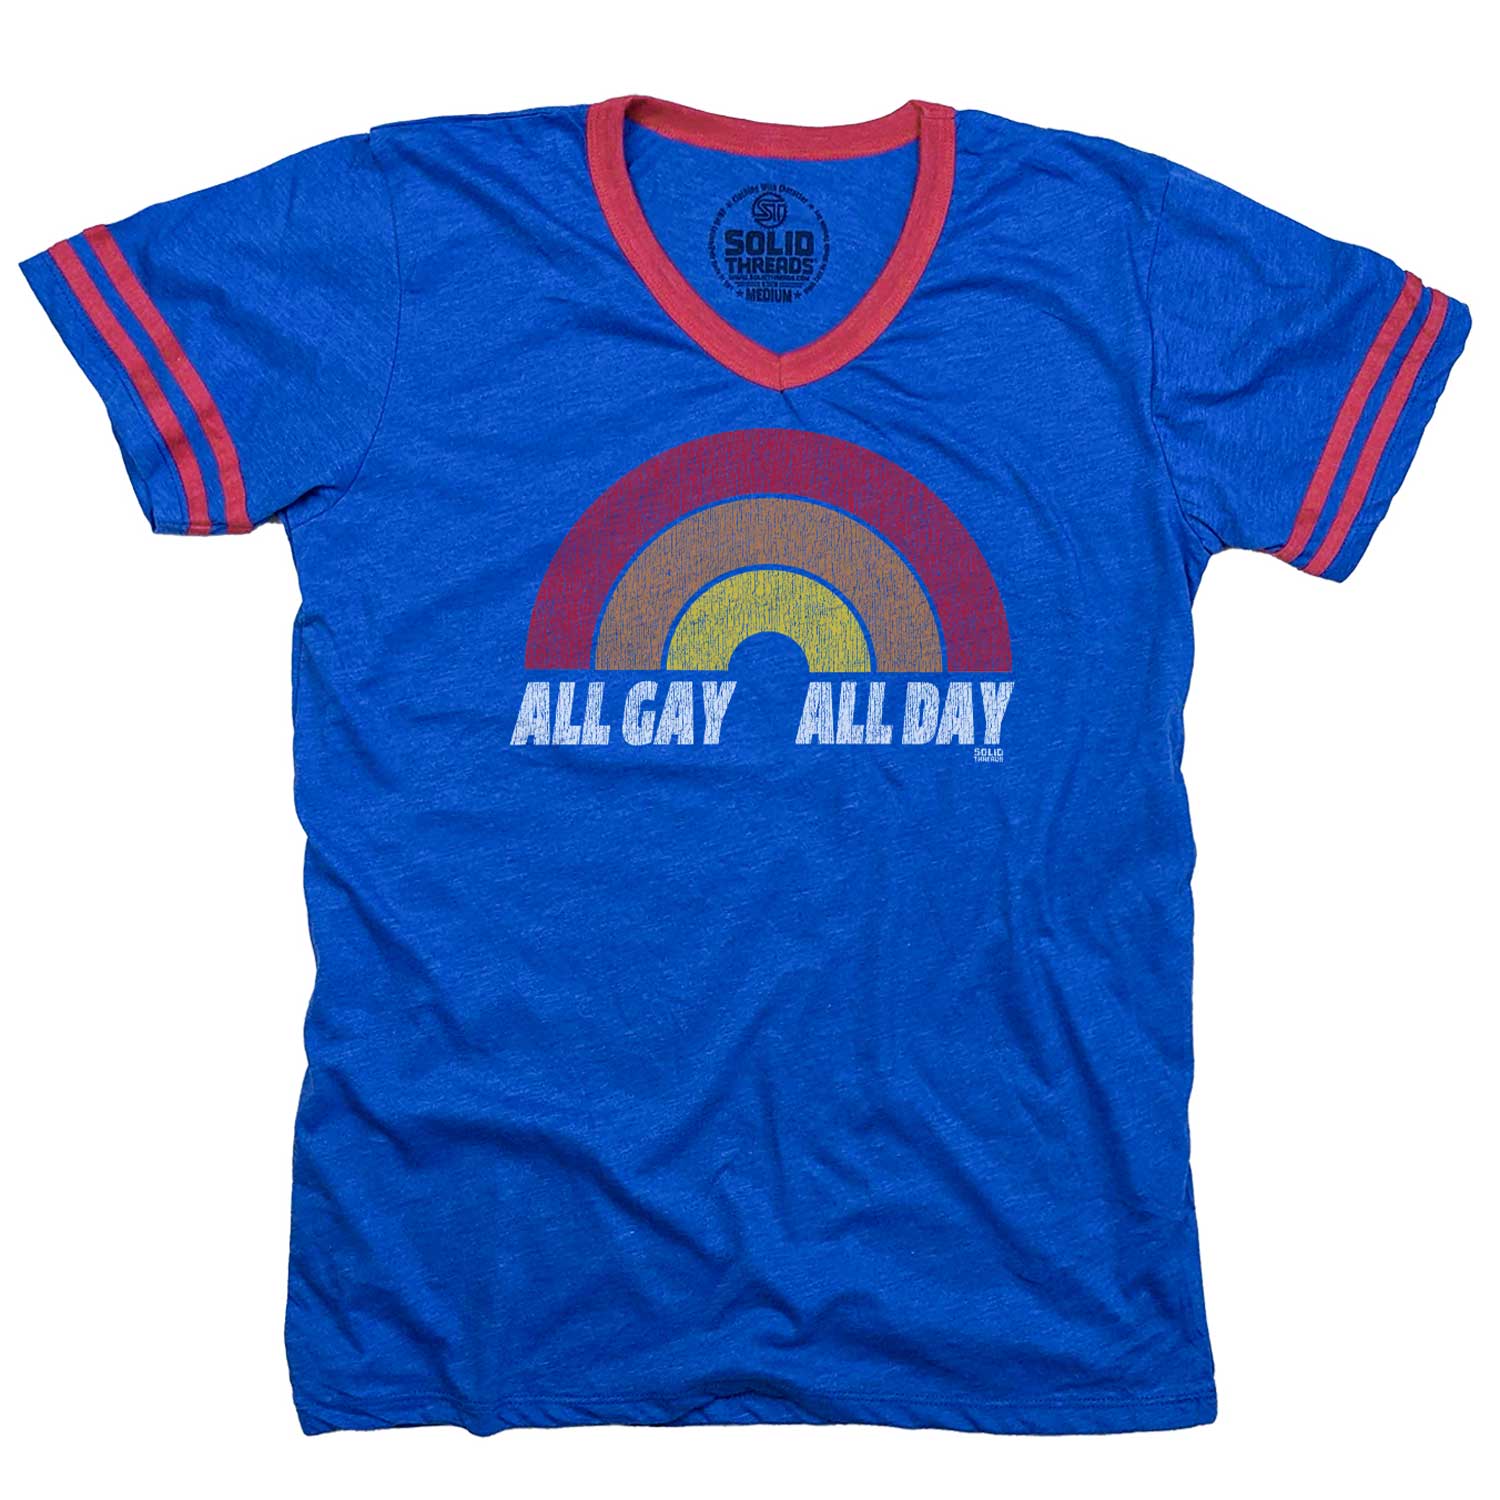 Men's All Gay All Day Vintage Graphic V-Neck Tee | Funny LGBTQ Retro Pride Shirt | SOLID THREADS